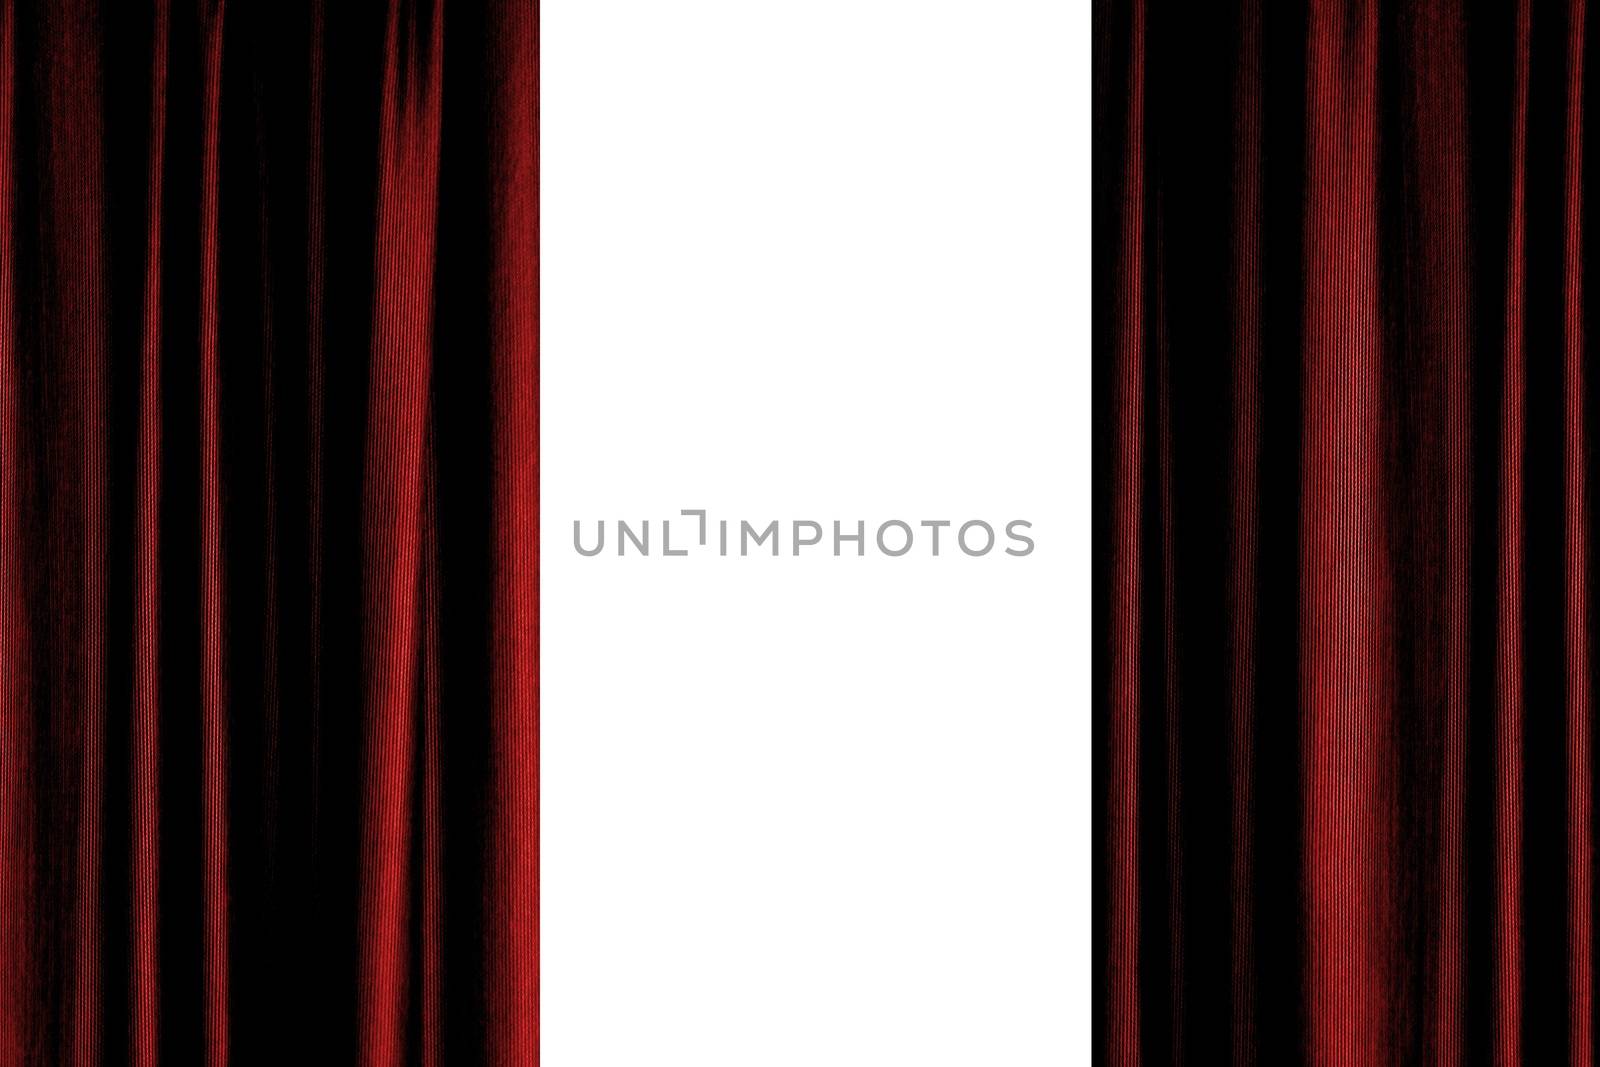 Abstract images of theatre curtains up close